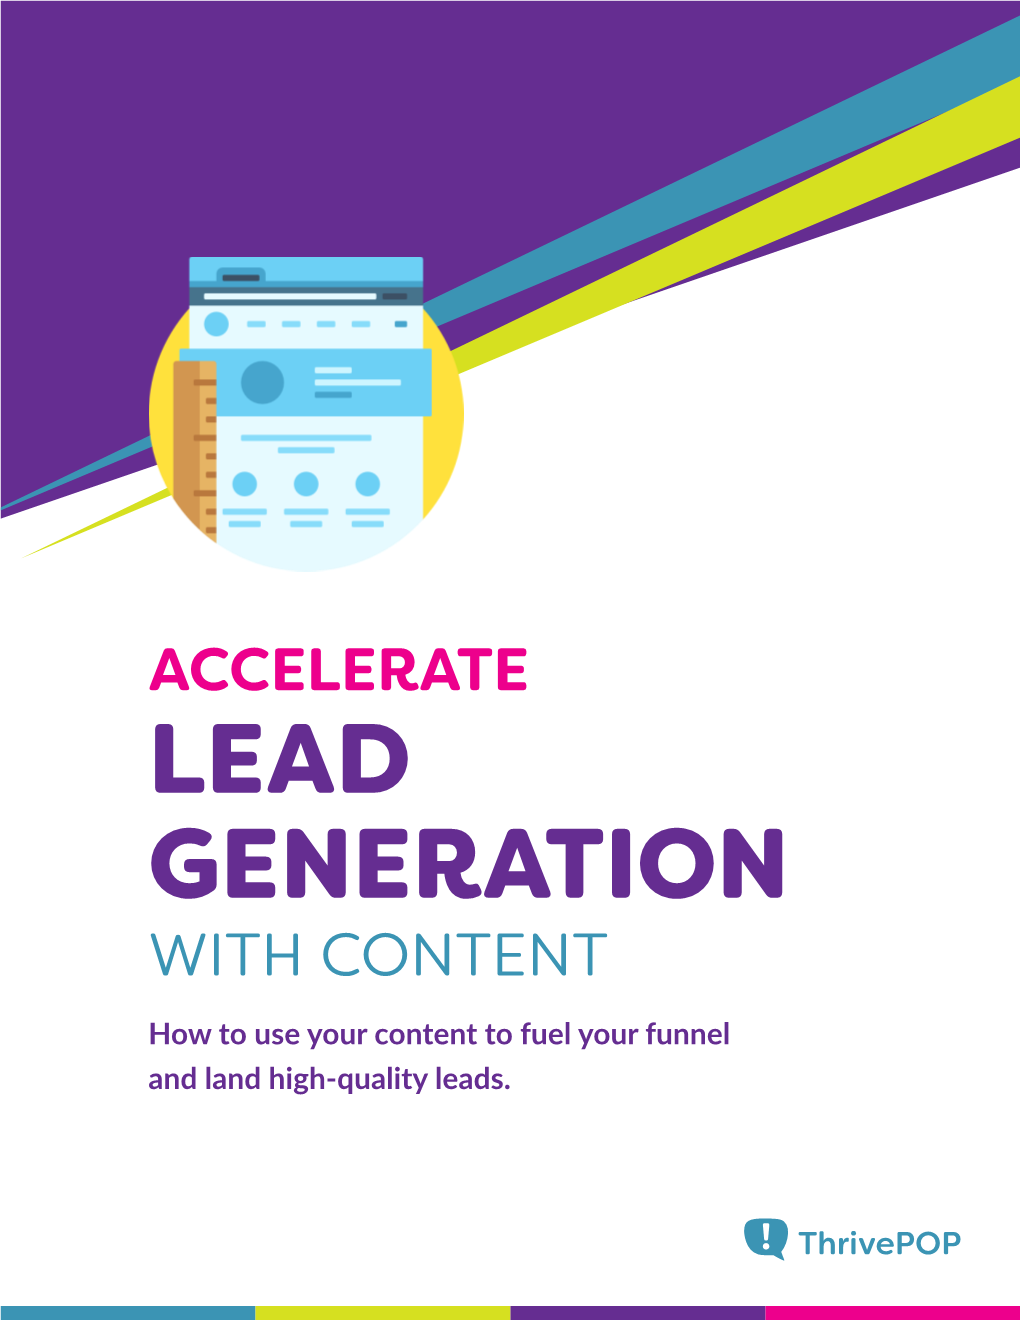 Lead Generation with Content